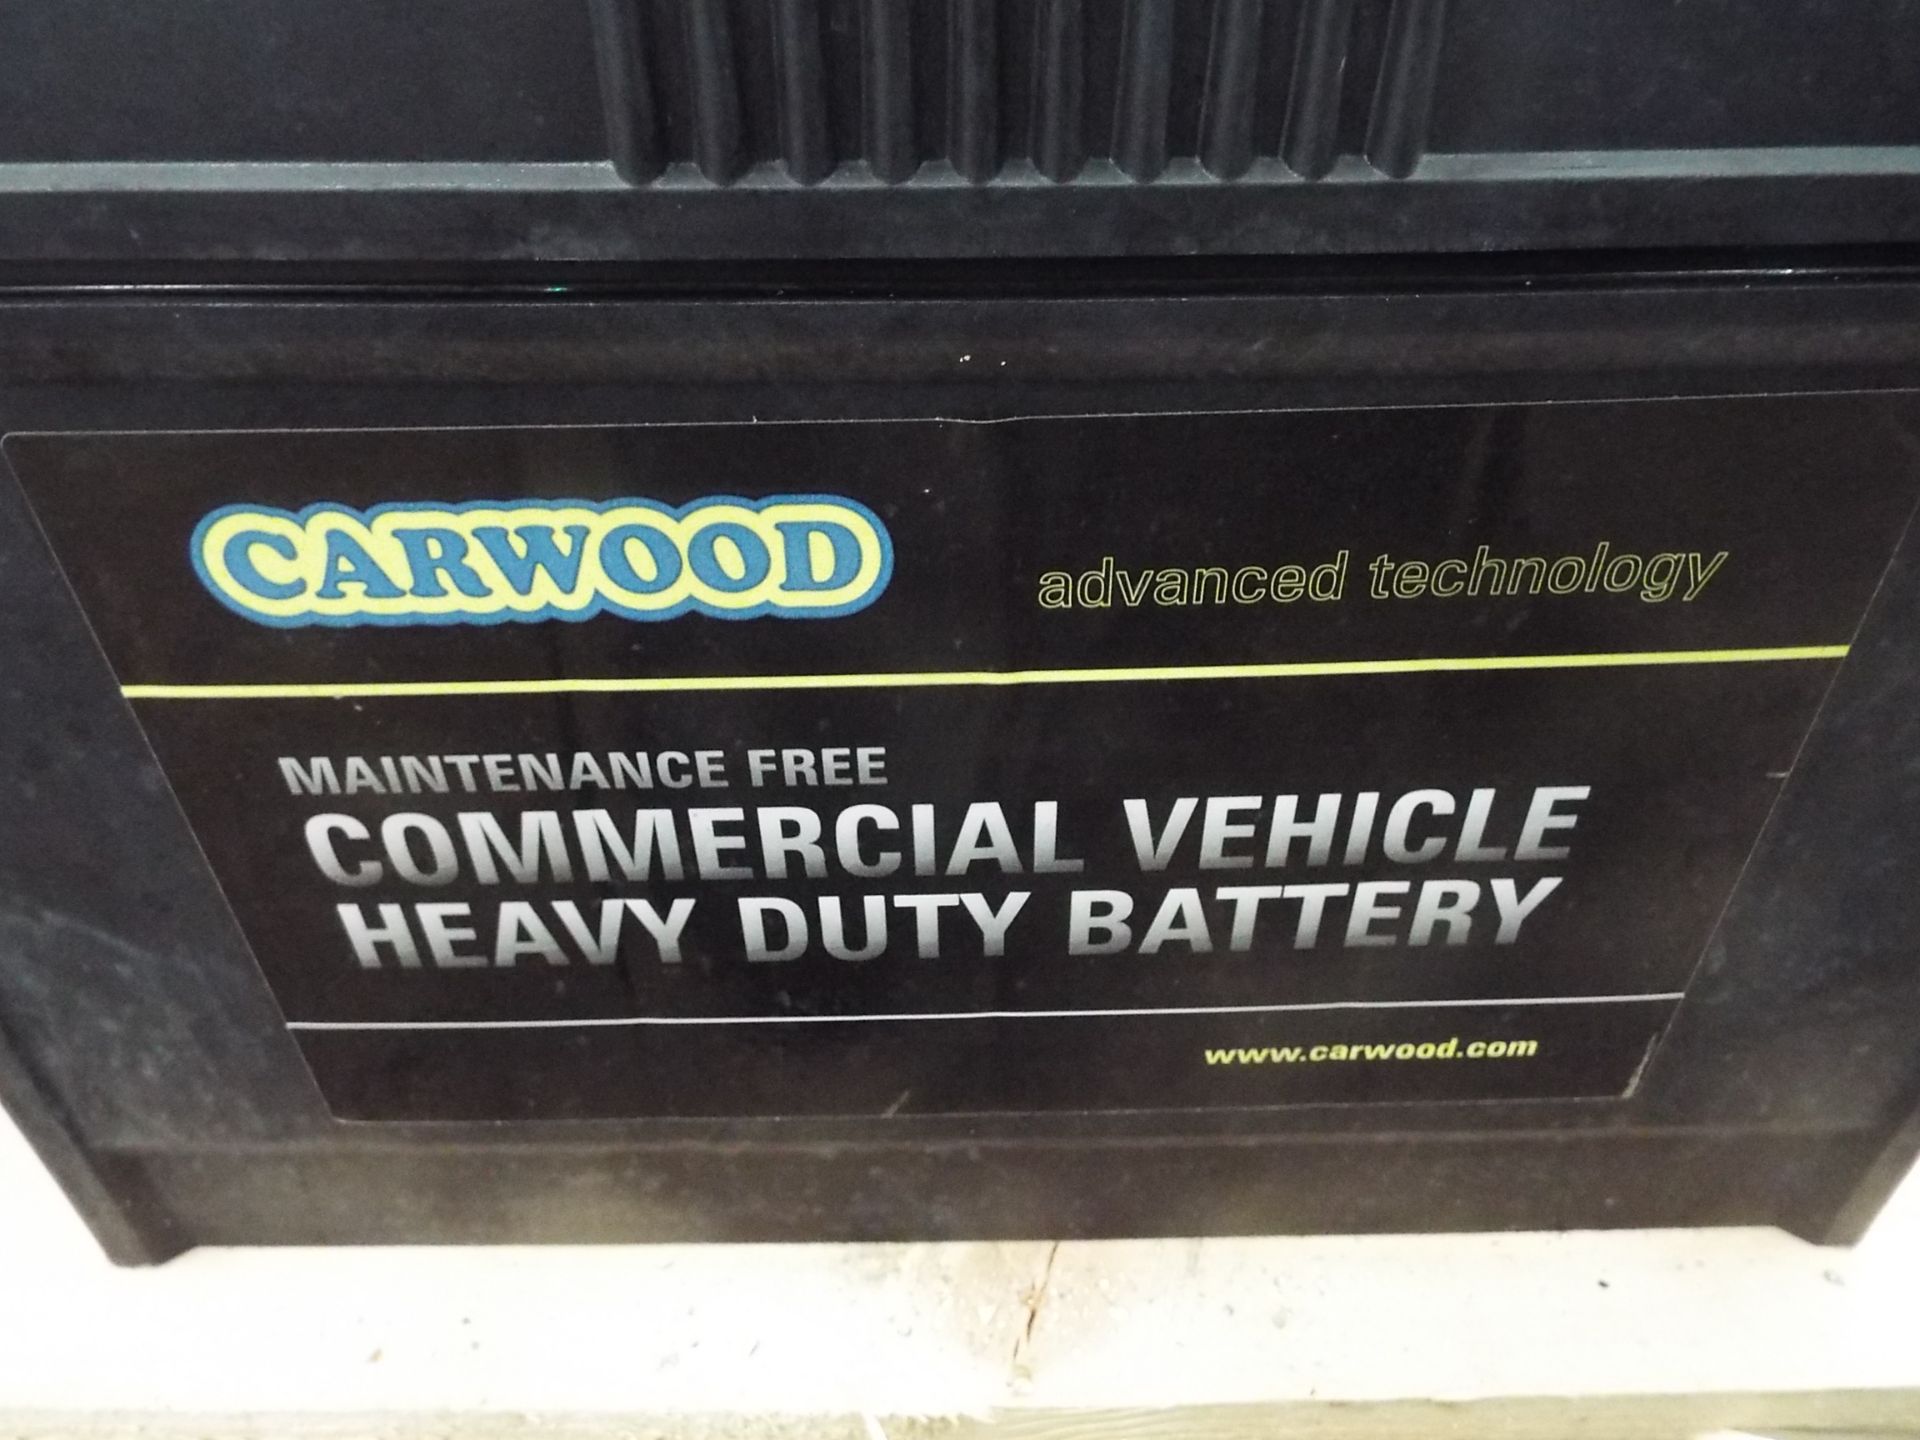 5 x Heavy Duty Carwood S31A-1000 12V Commercial Vehicle Batteries - Image 2 of 4